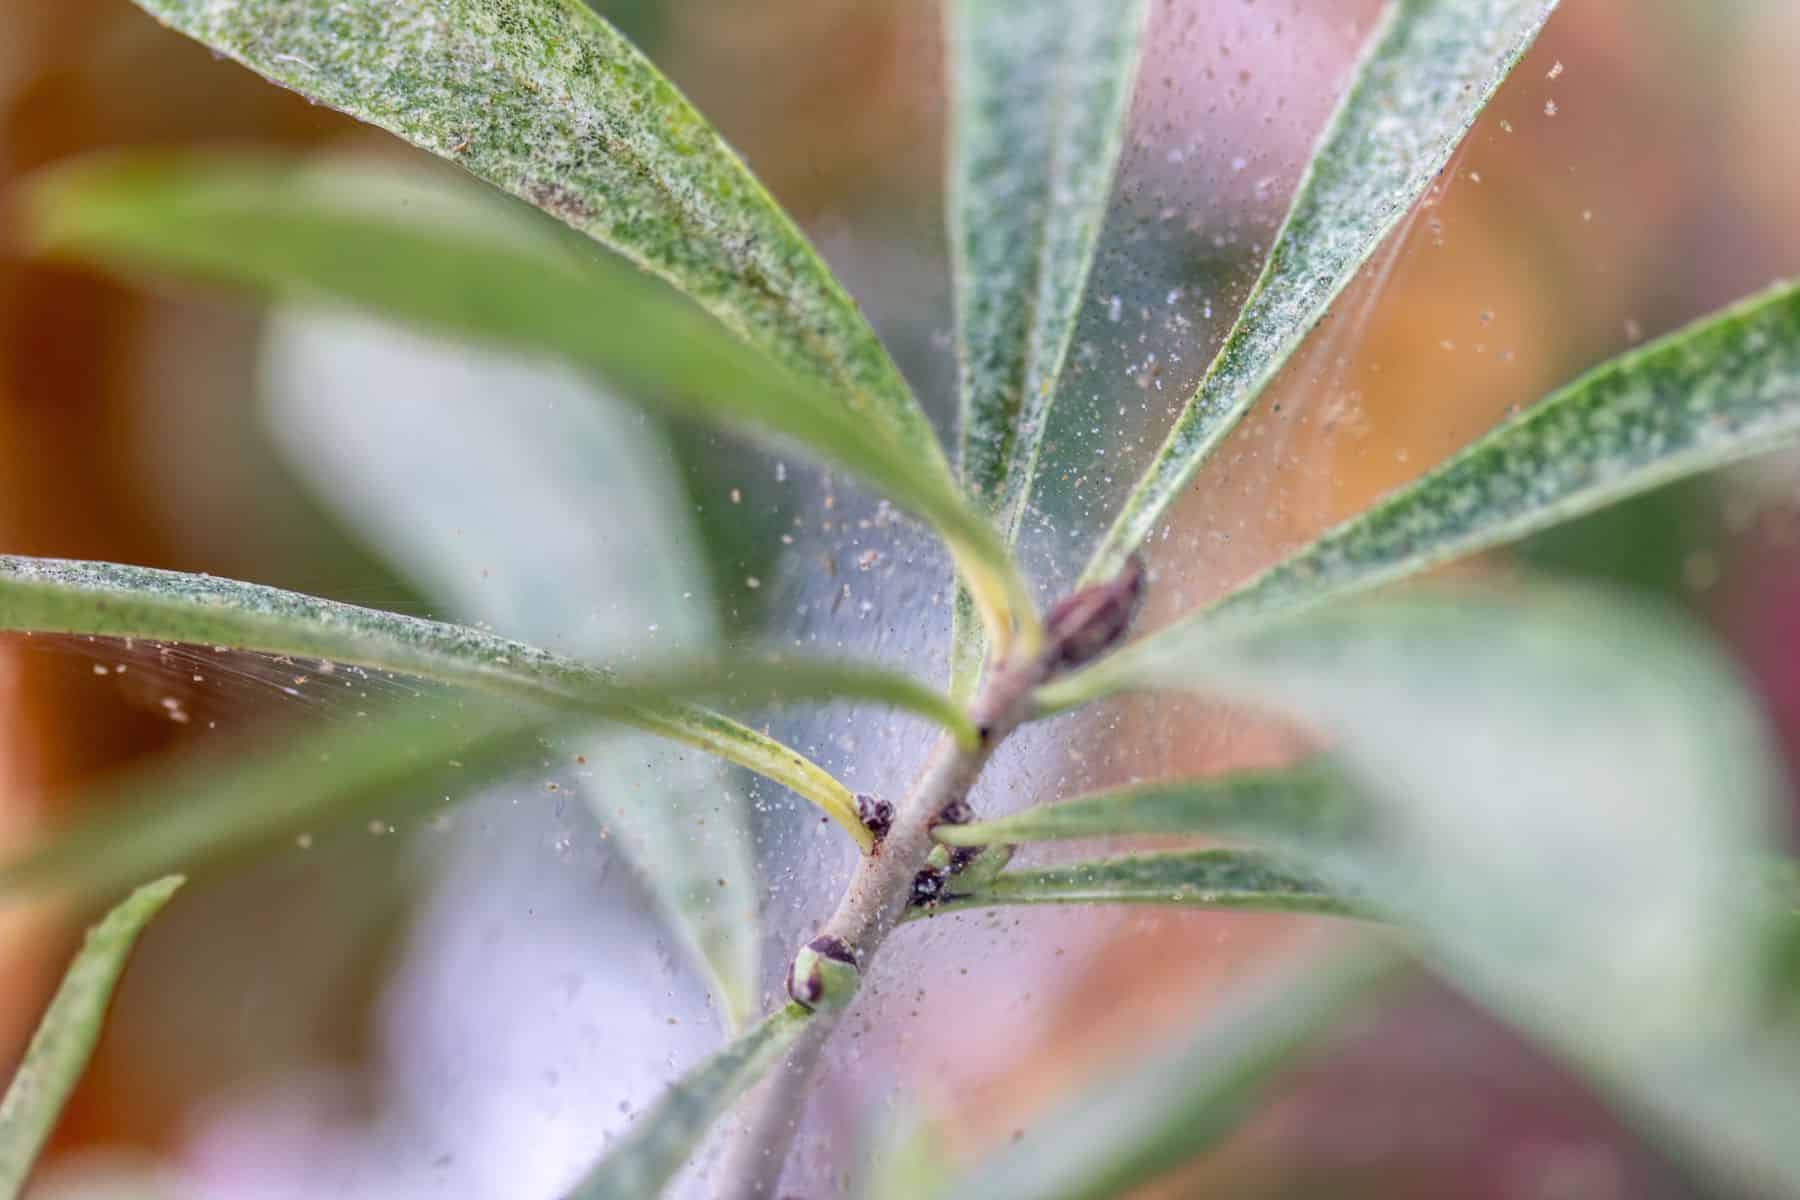 Spider mite webbing shown on an infested plant, photo credit Shutterstock.